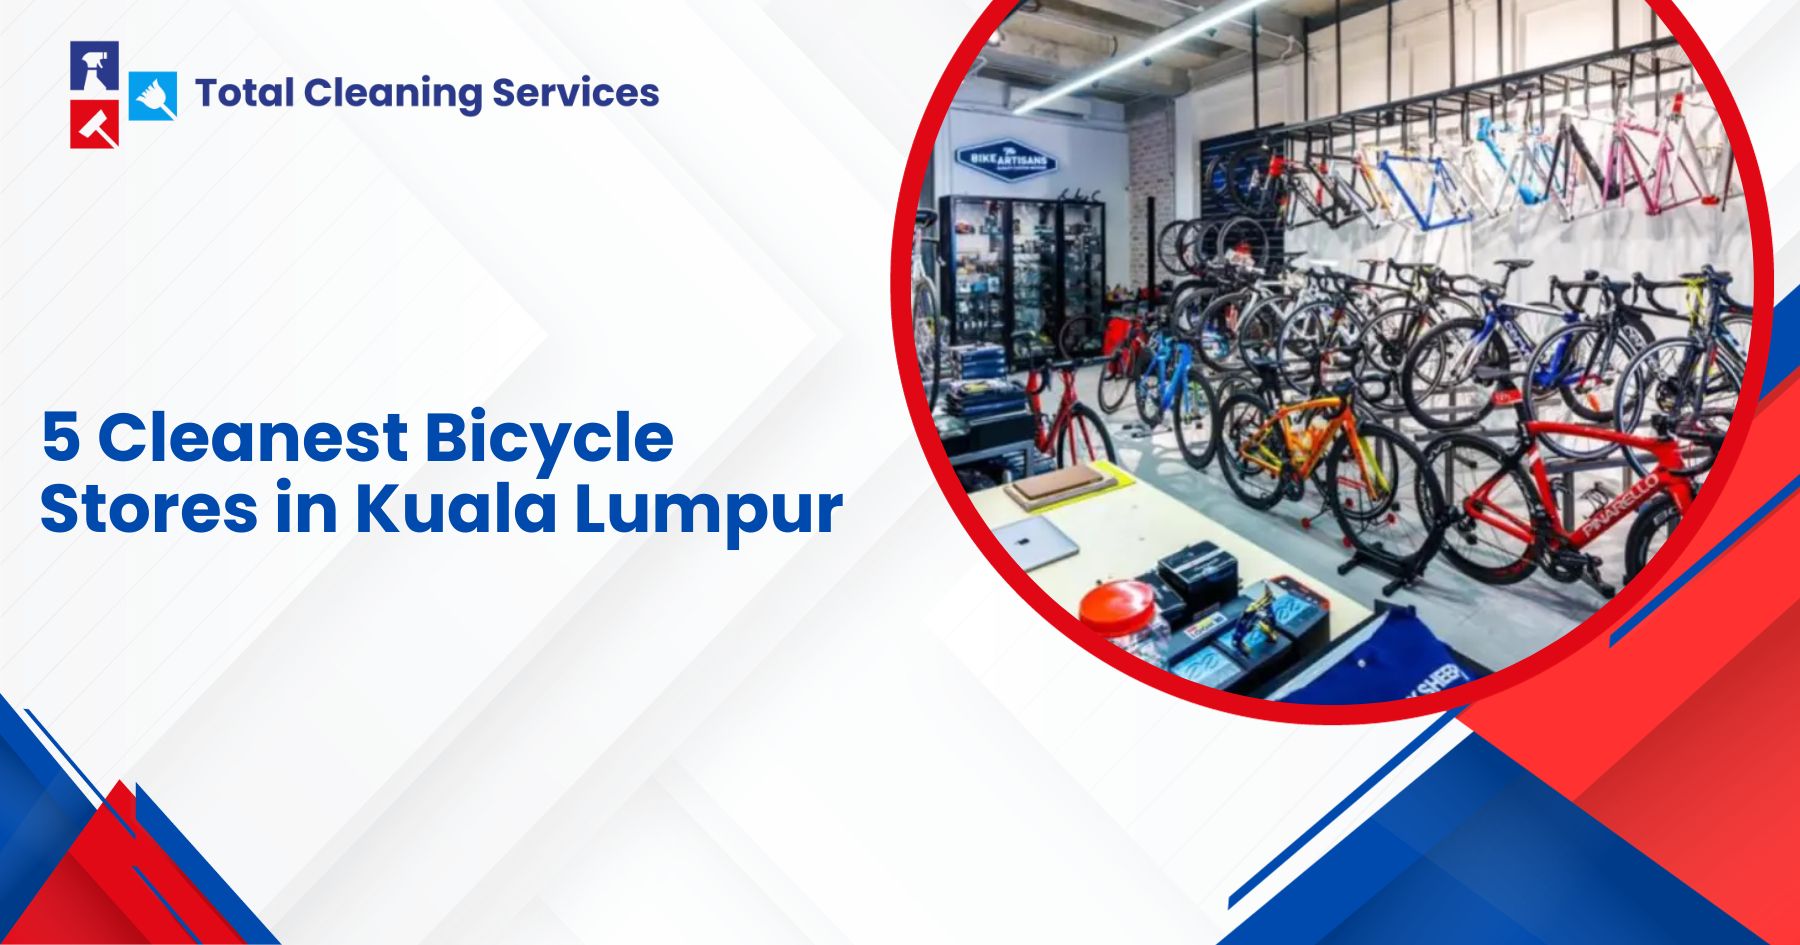 5 Cleanest Bicycle Stores in Kuala Lumpur